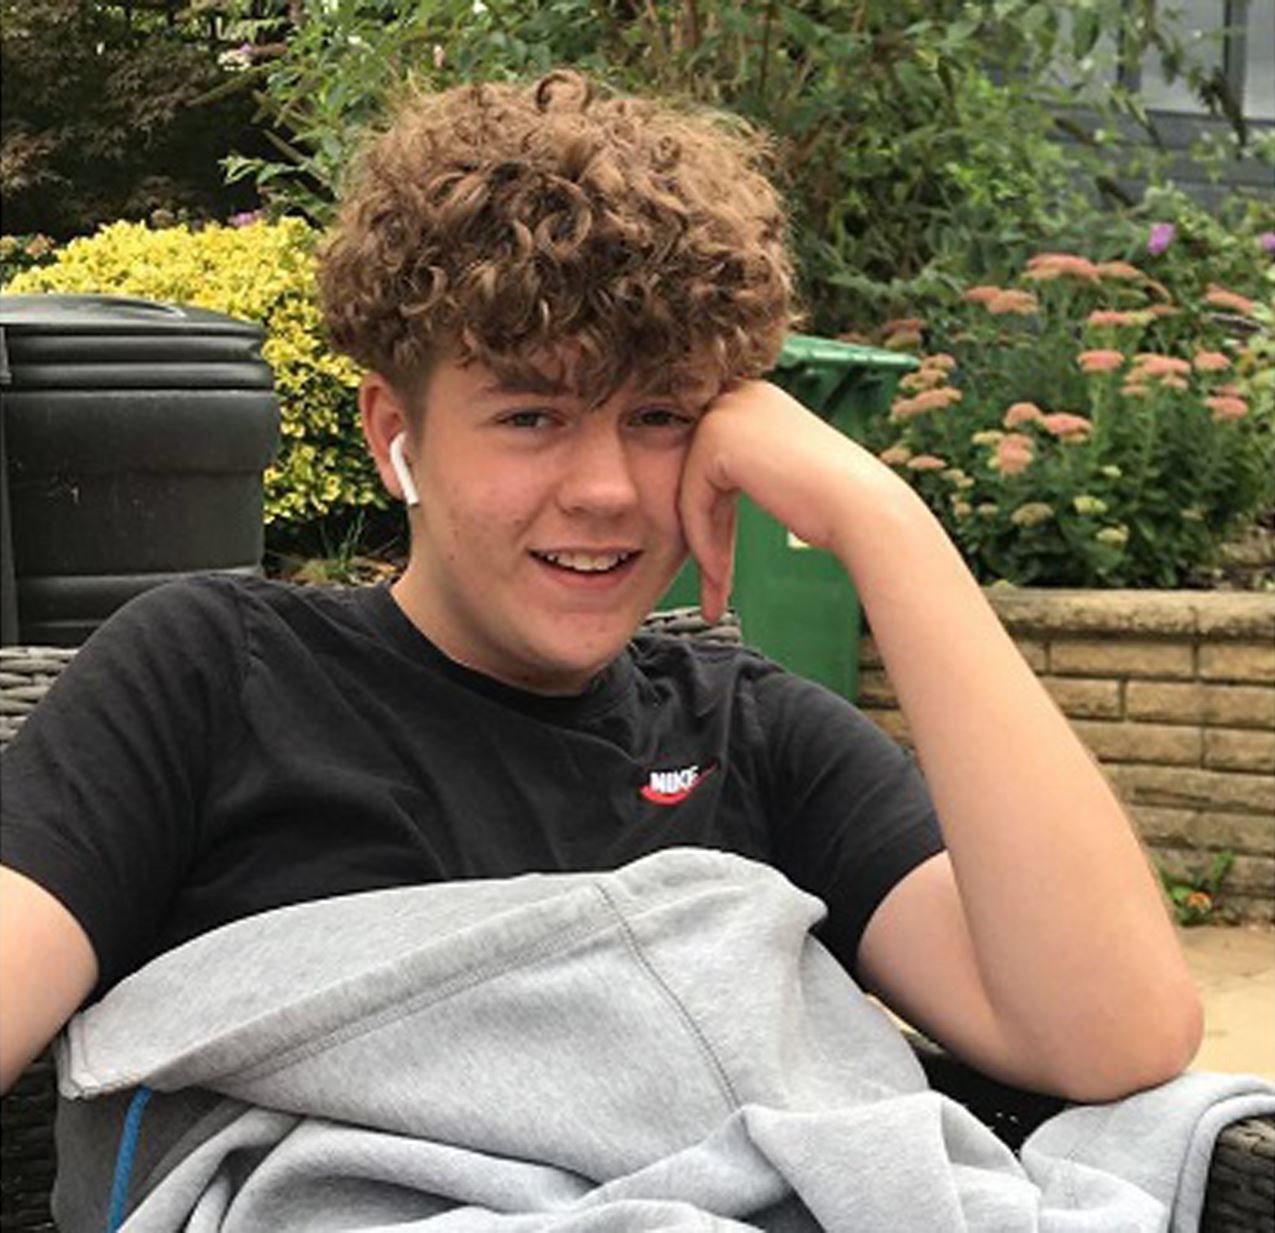 Olly Stephens, 13, died after being stabbed at Bugs Bottom fields, Emmer Green, in Reading (Thames Valley Police handout/PA)